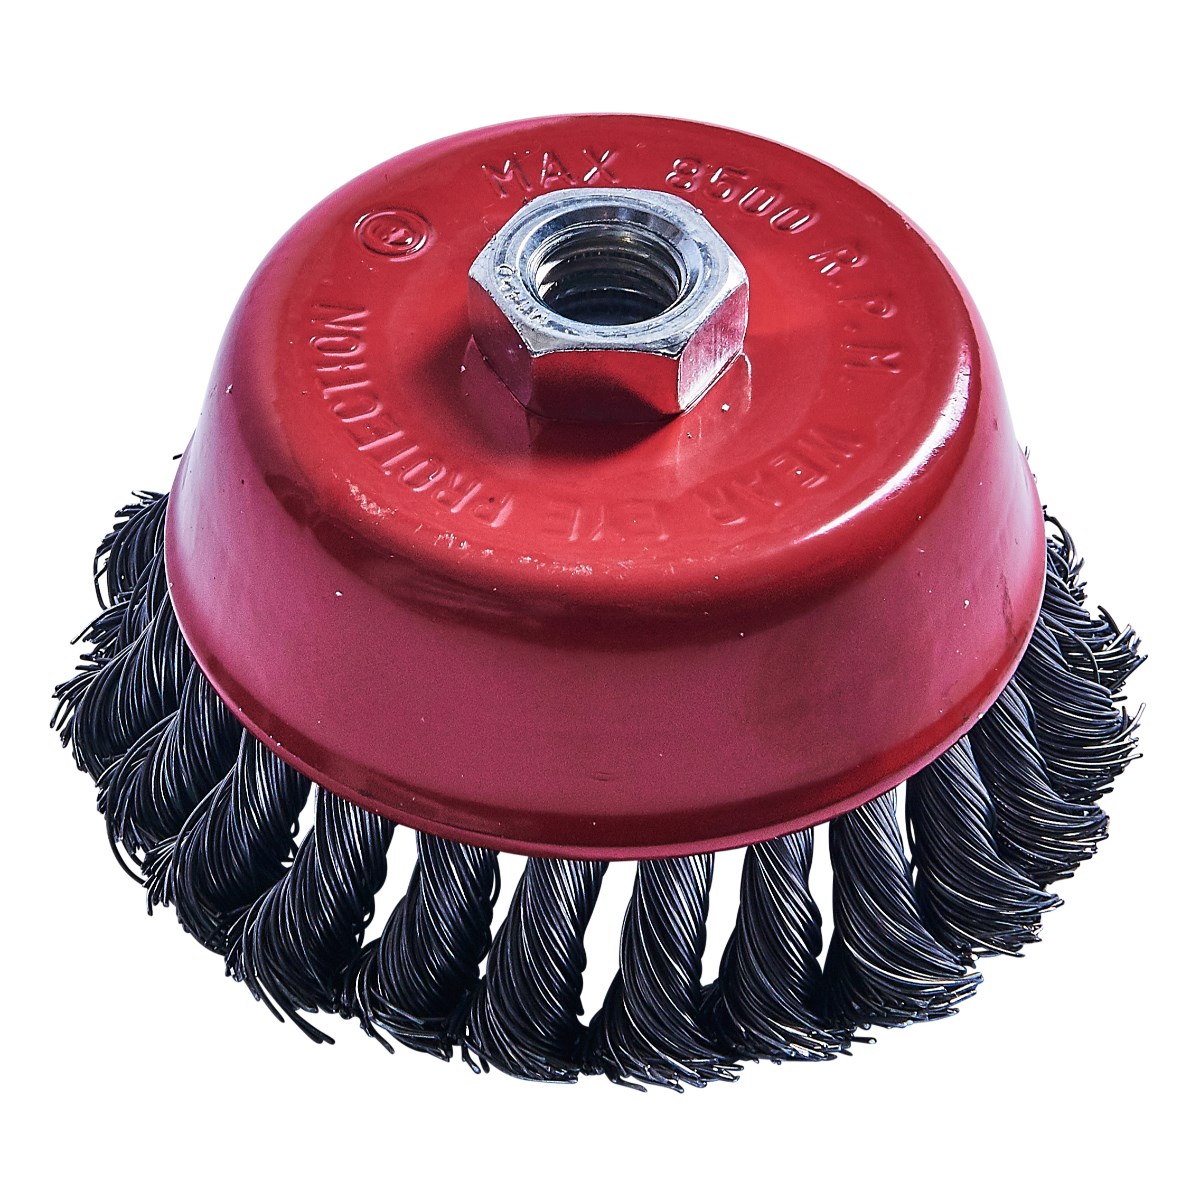 2-3/4 125, 2-3/4 inch Knot Type Wire Cup Brush